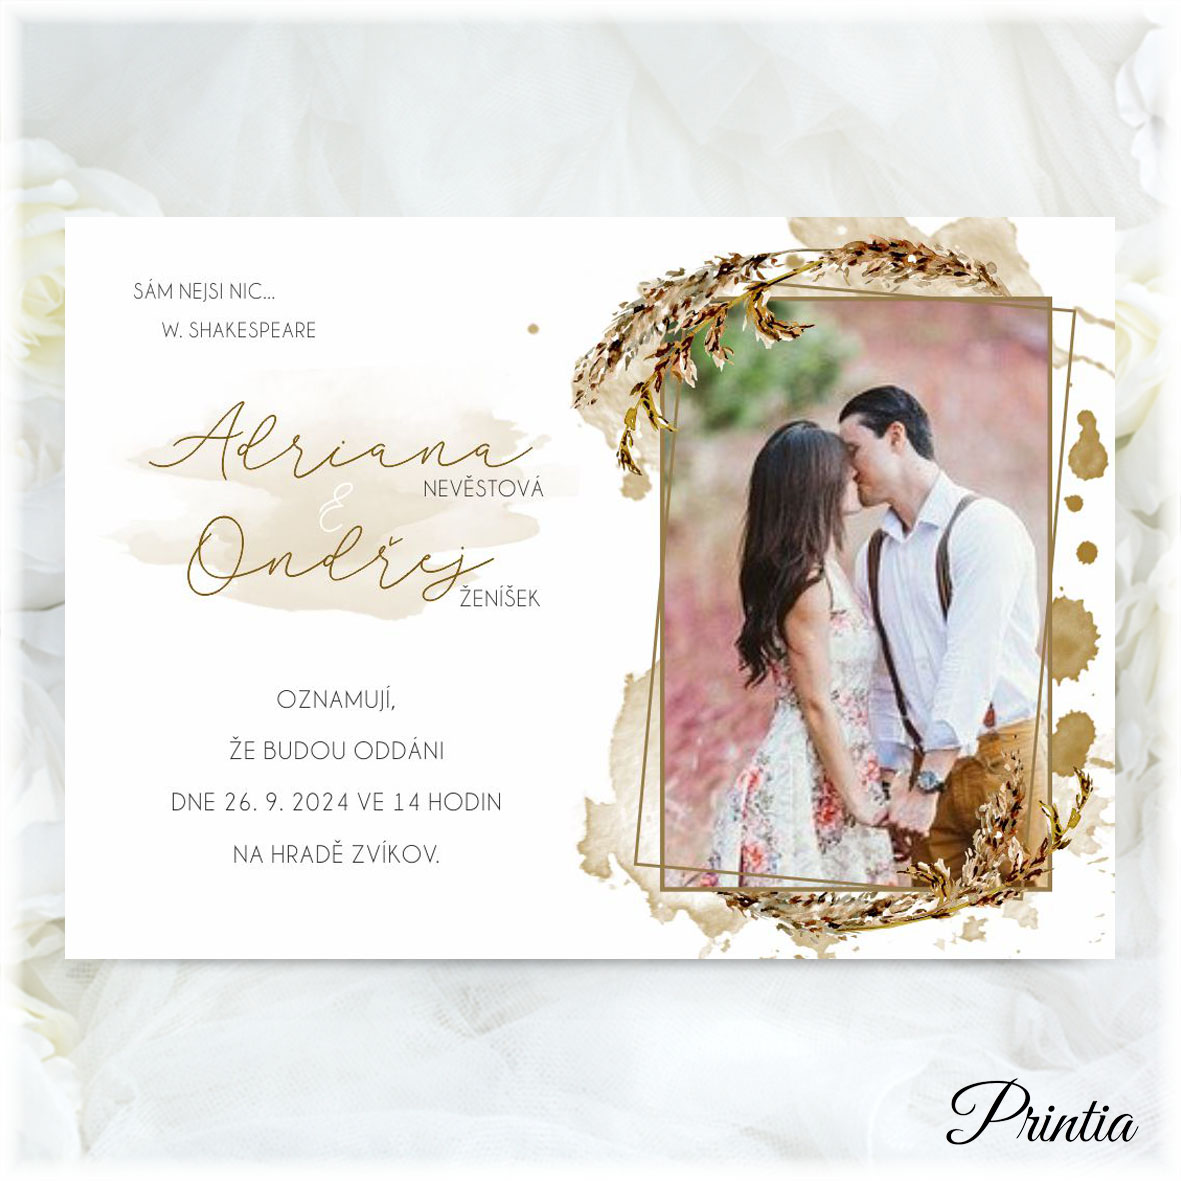 Floral wedding invitation with photo